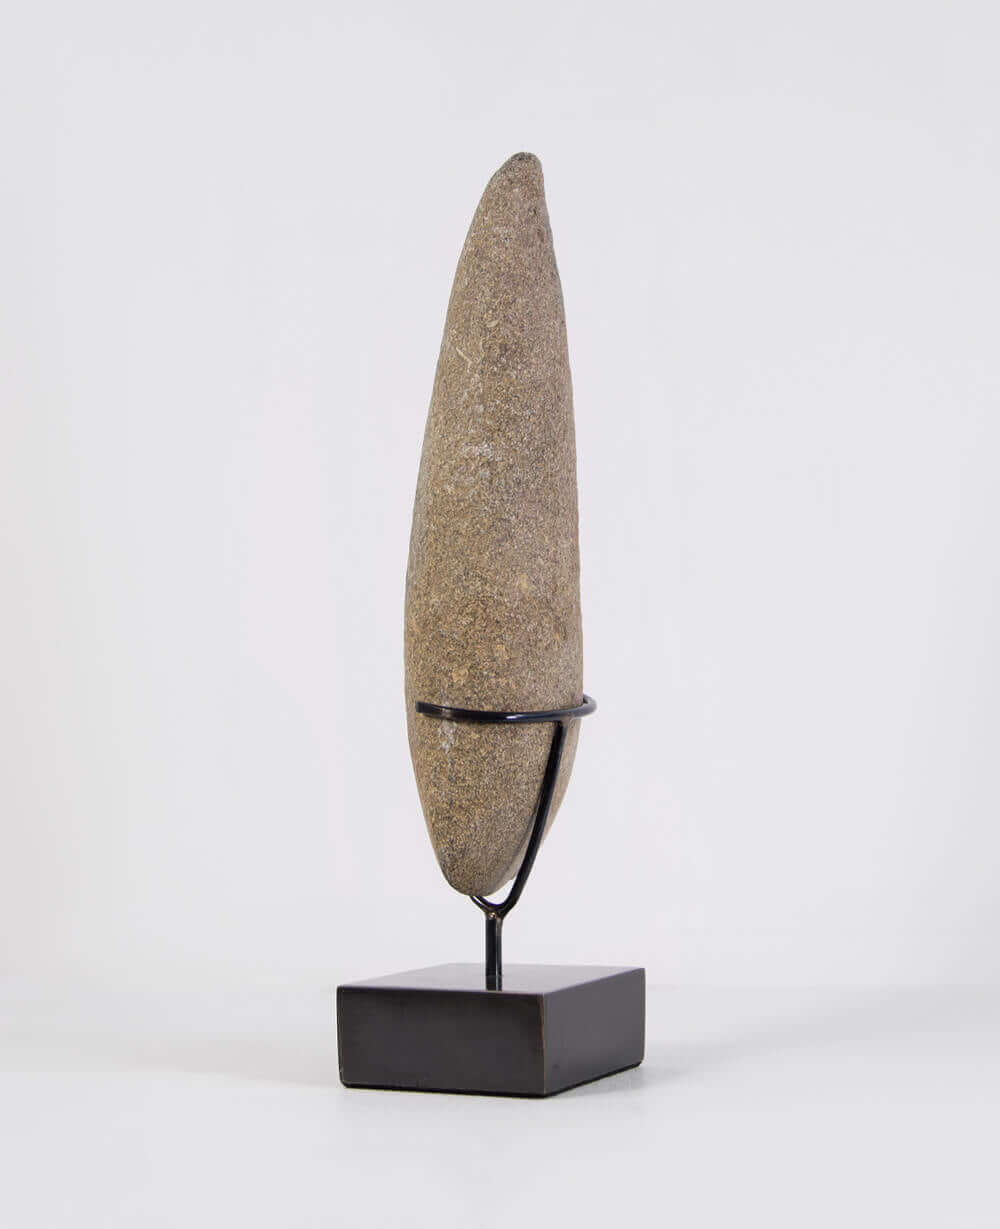 A stunning museum-standard rare authentic Neolithic hand axe measuring 261mm created by an ancient hand